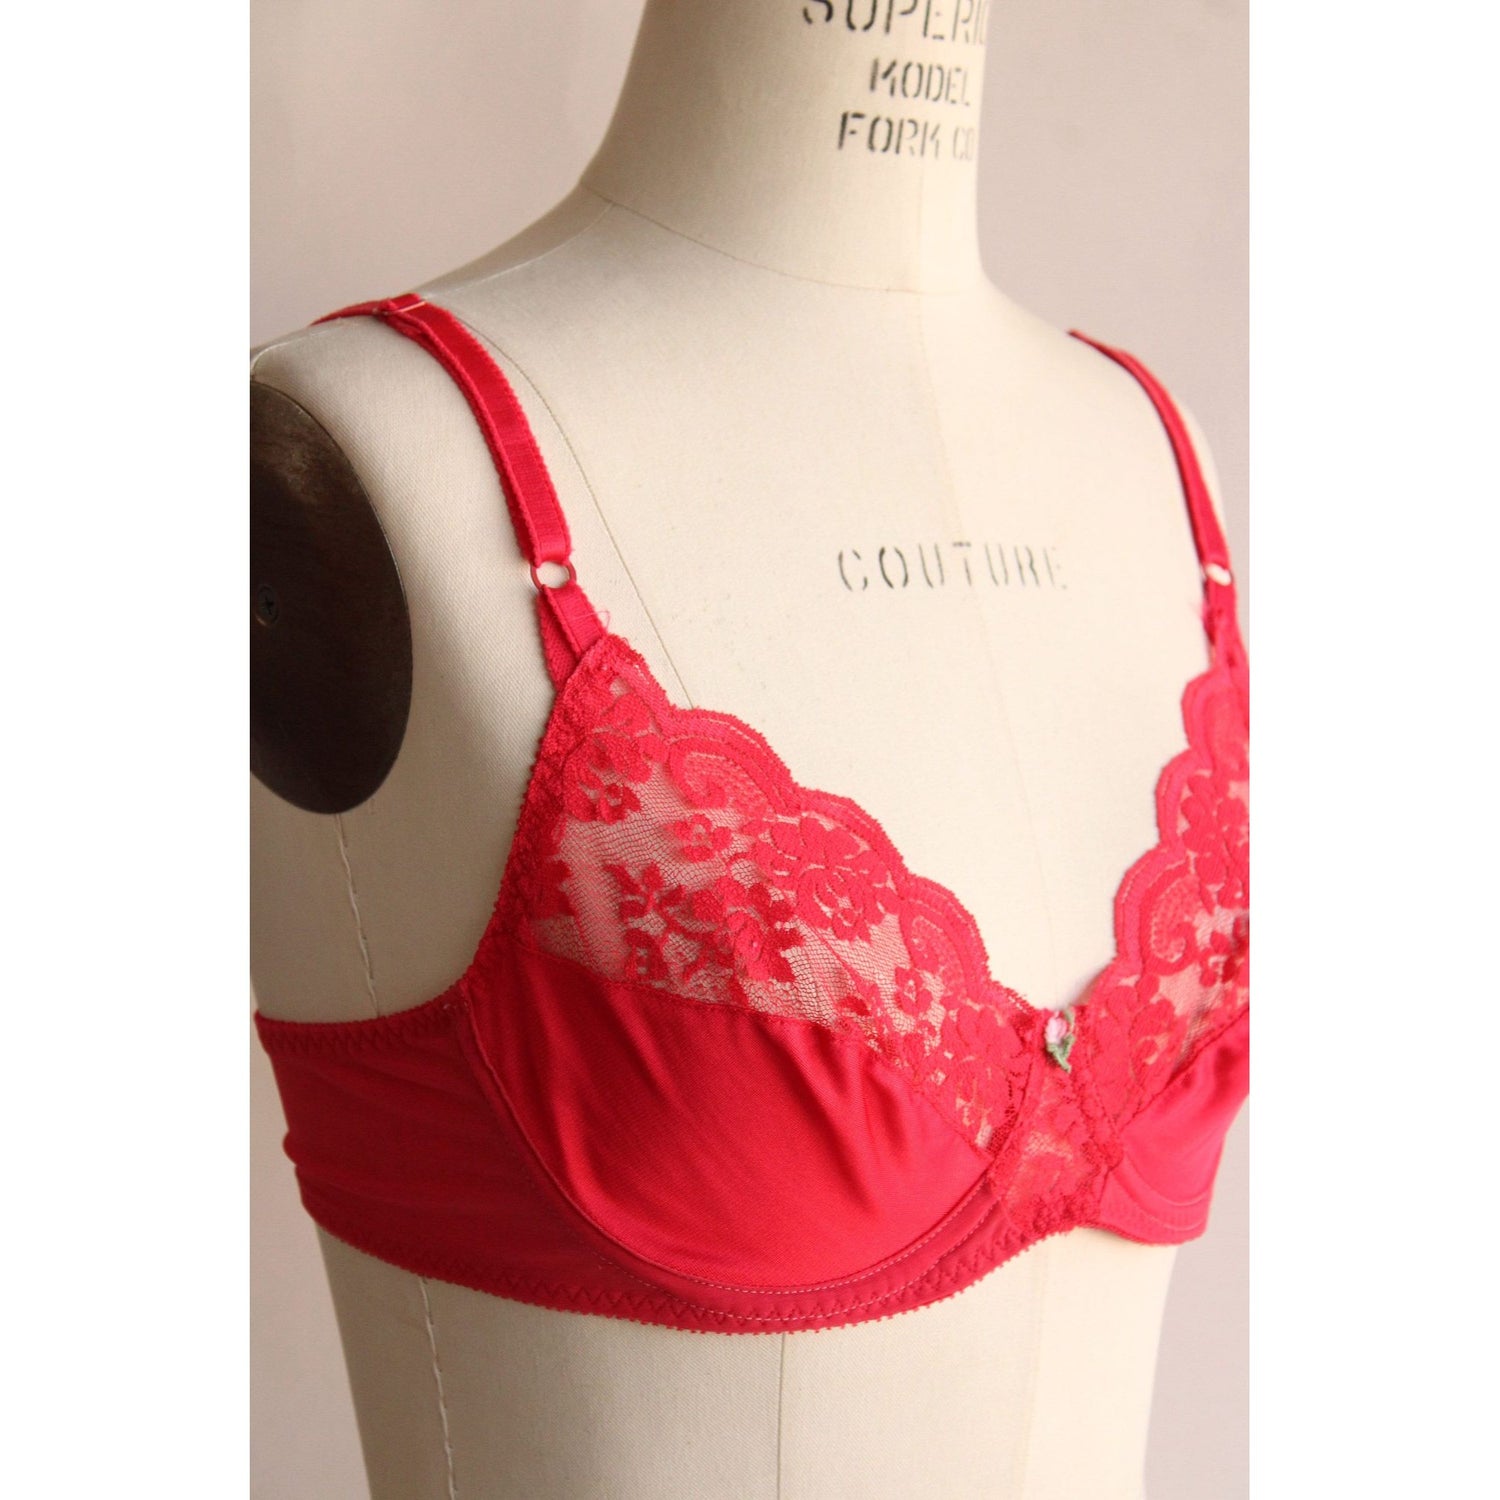 4605 MAIDEN FORM Red Lace Lightly Padded TShirt Bra SIZE 36C